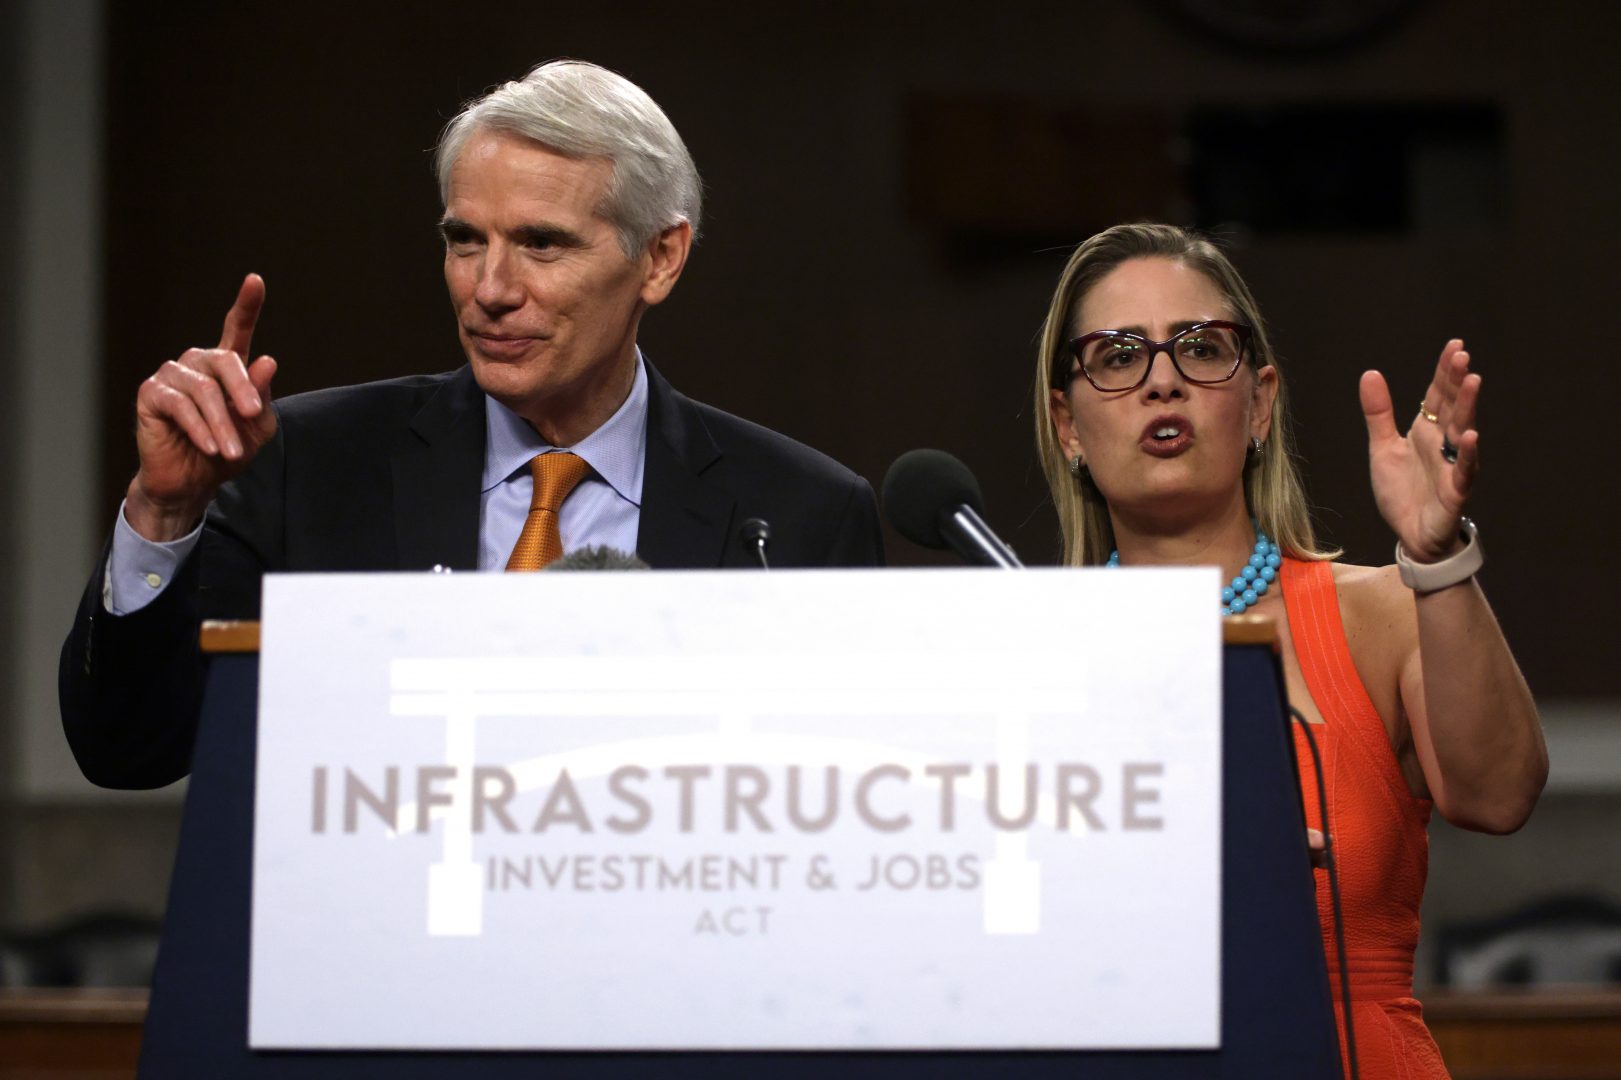 Sens. Rob Portman, R-Ohio, and Kyrsten Sinema, D-Ariz., take questions at a news conference last week after a procedural vote for the bipartisan infrastructure framework.